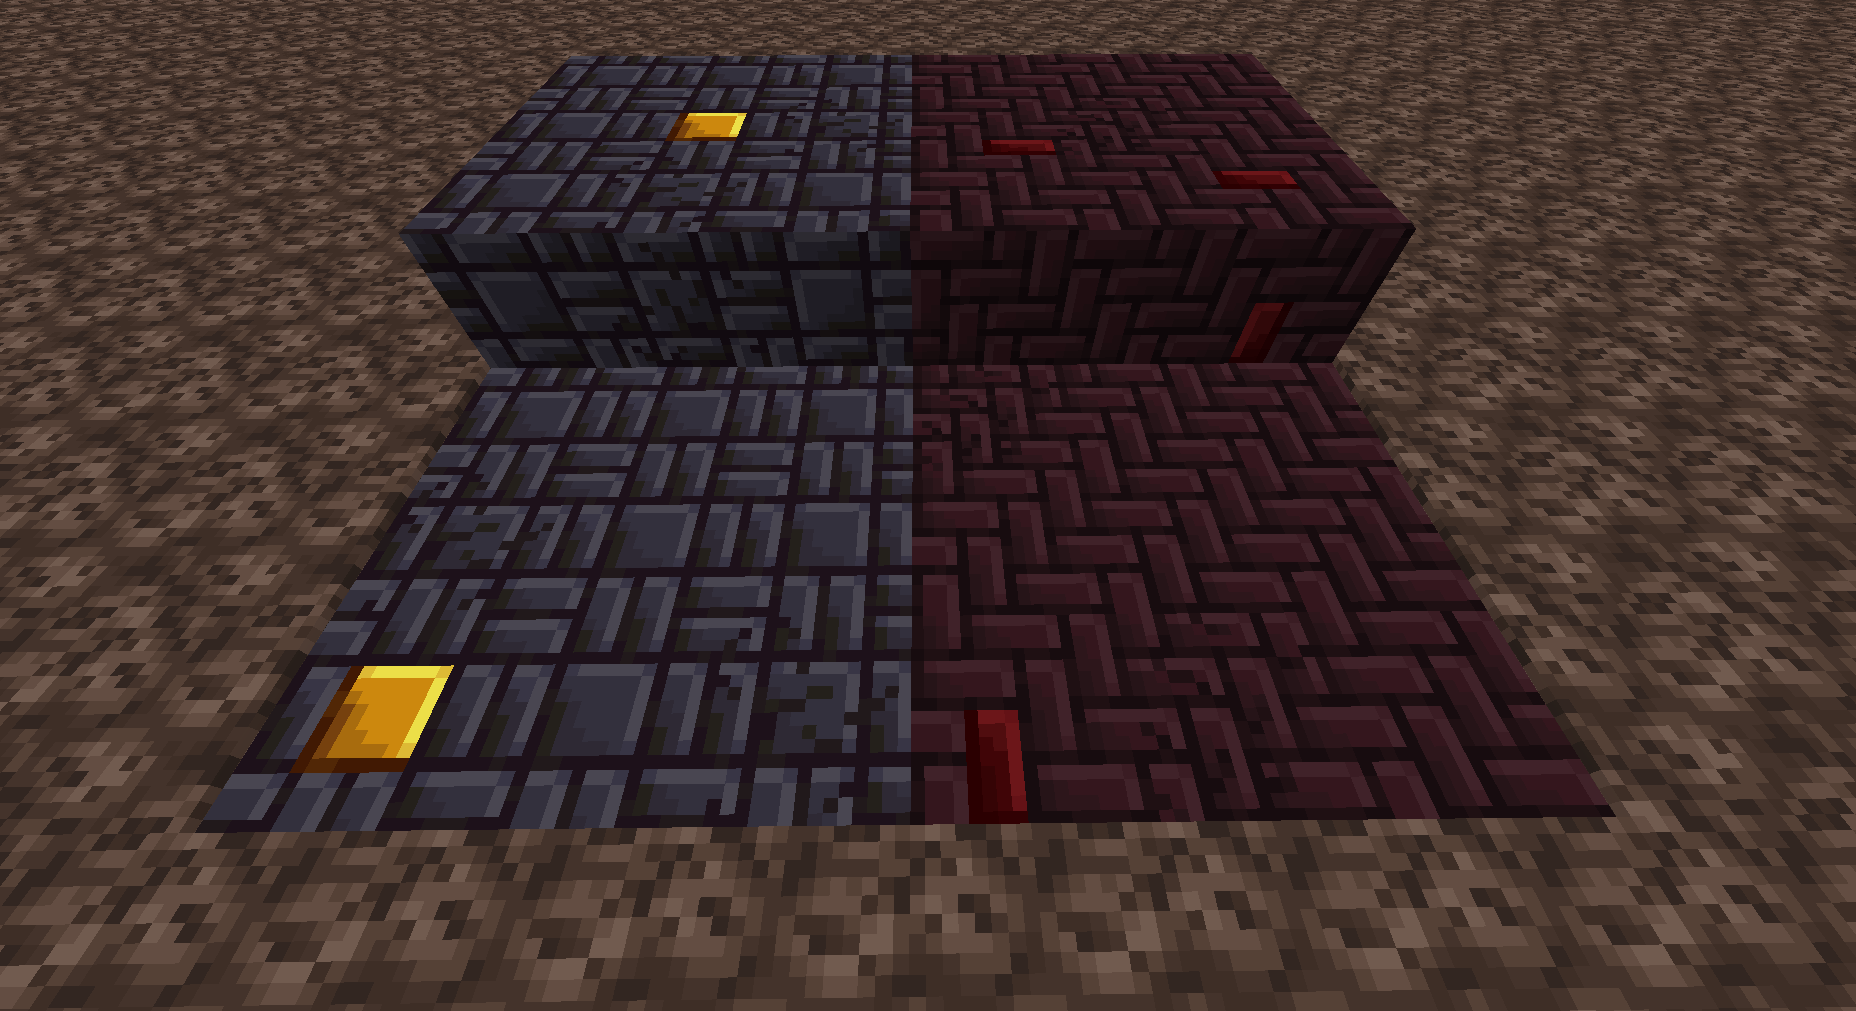 Nether Paths